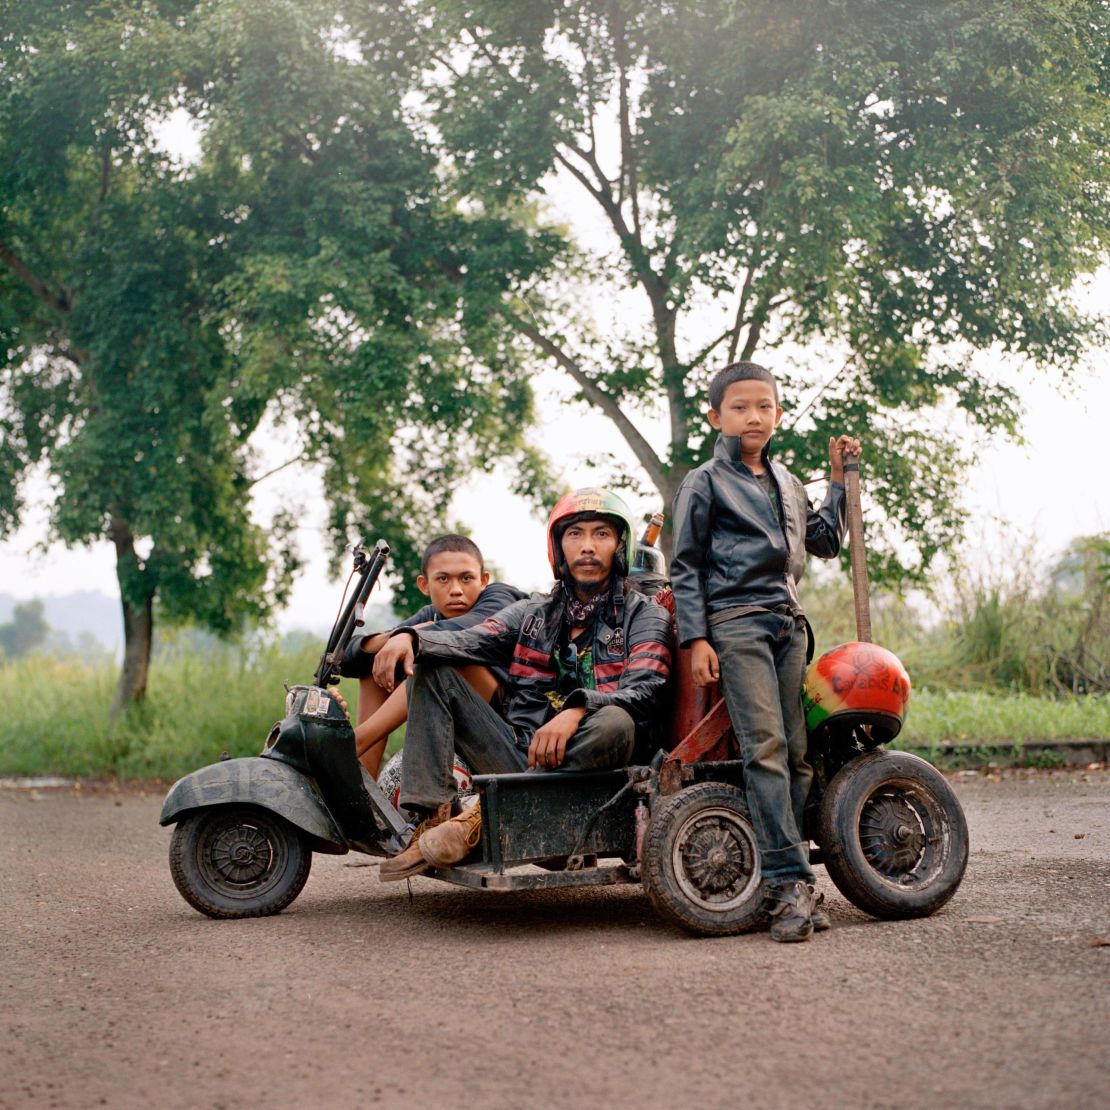 Photographer Muhammad Fadli photographed a series on the Indonesian subculture around Vespa scooters, capturing a group of young people building their own vehicles.